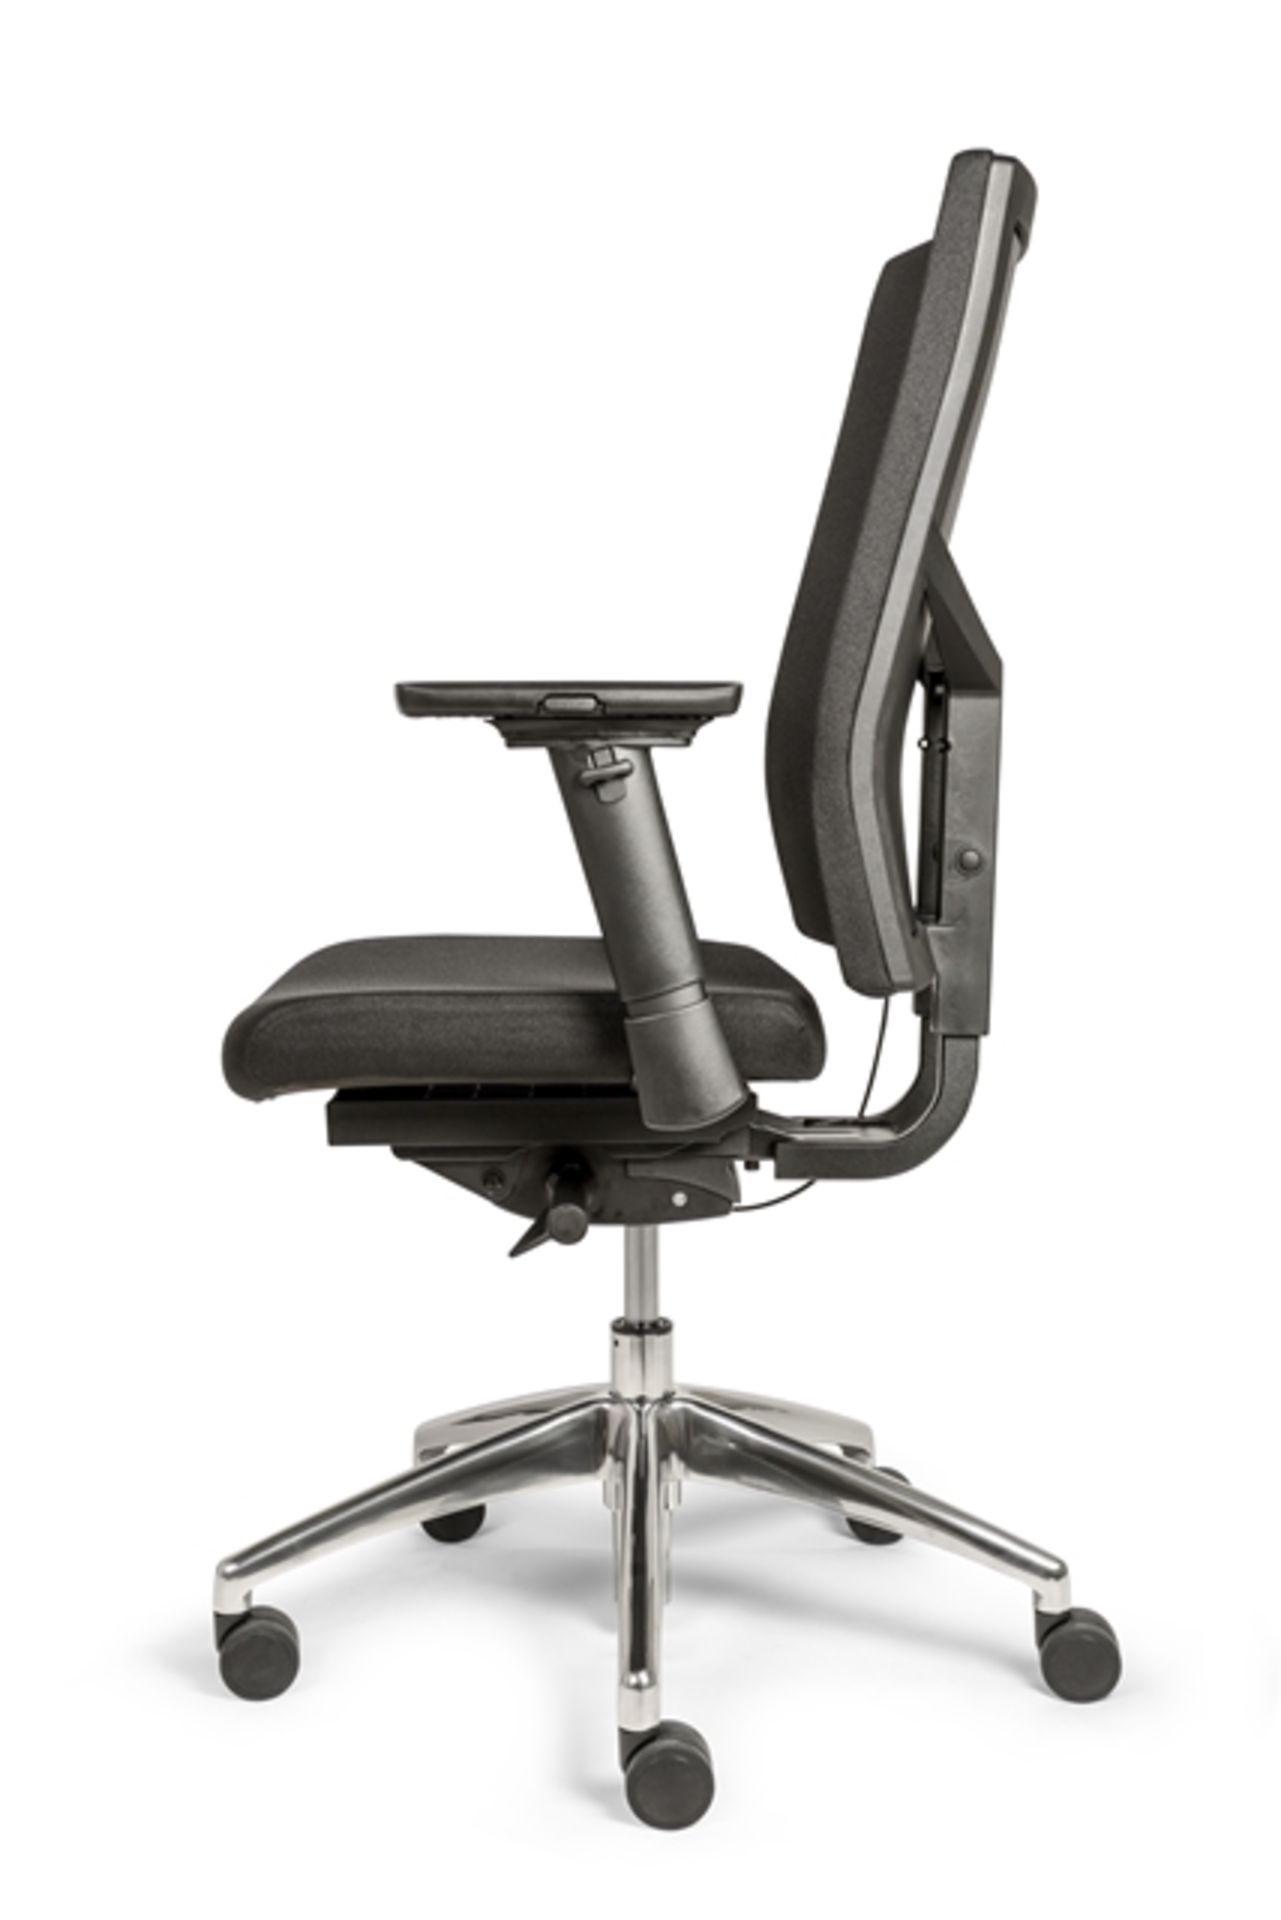 Unused ergonomic fully upholstered office chair in black (RRP £289) located in Stafford, viewing - Image 3 of 7